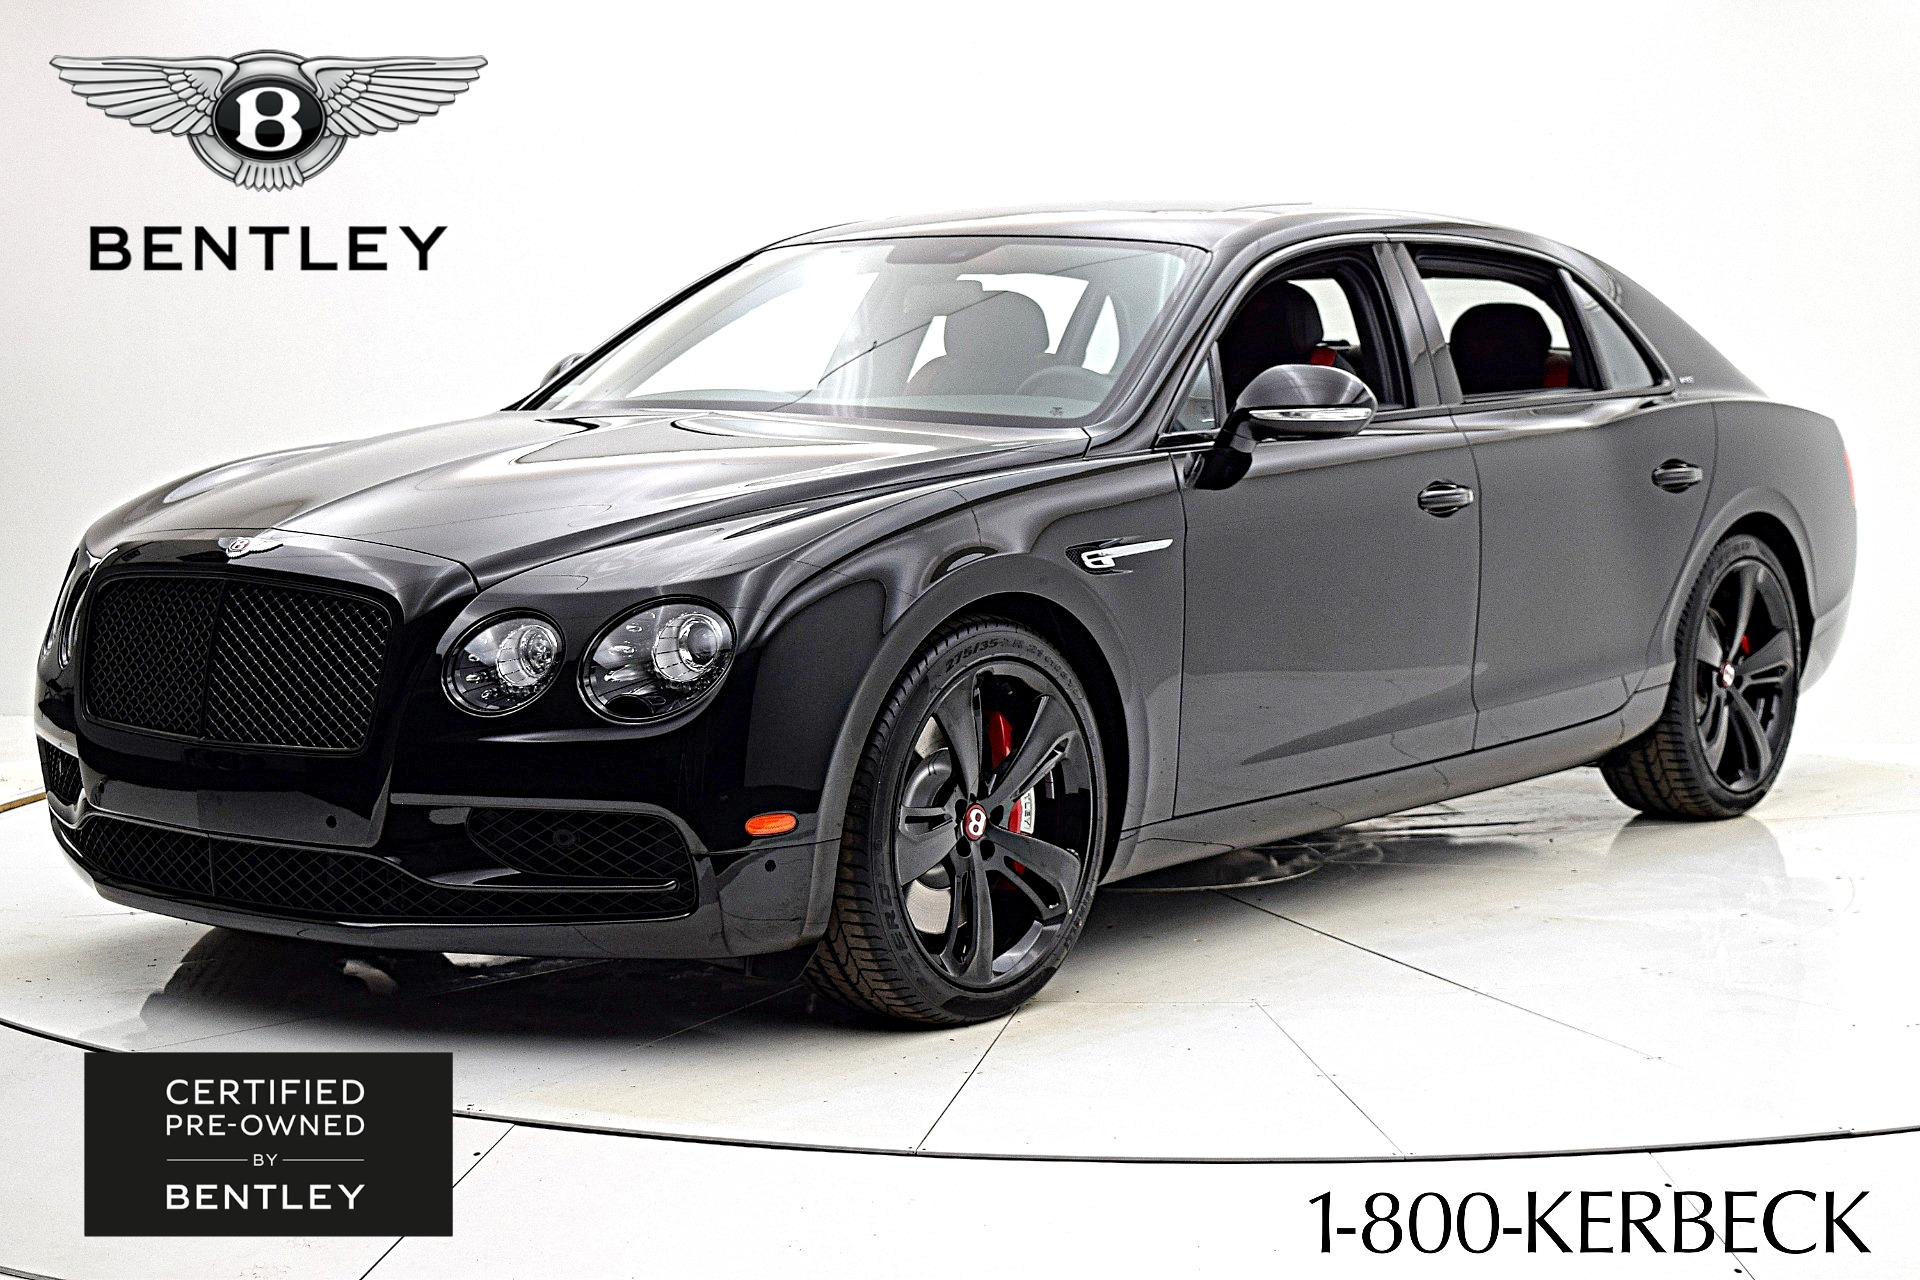 Used 2018 Bentley Flying Spur V8 S for sale $109,000 at Bentley Palmyra N.J. in Palmyra NJ 08065 2